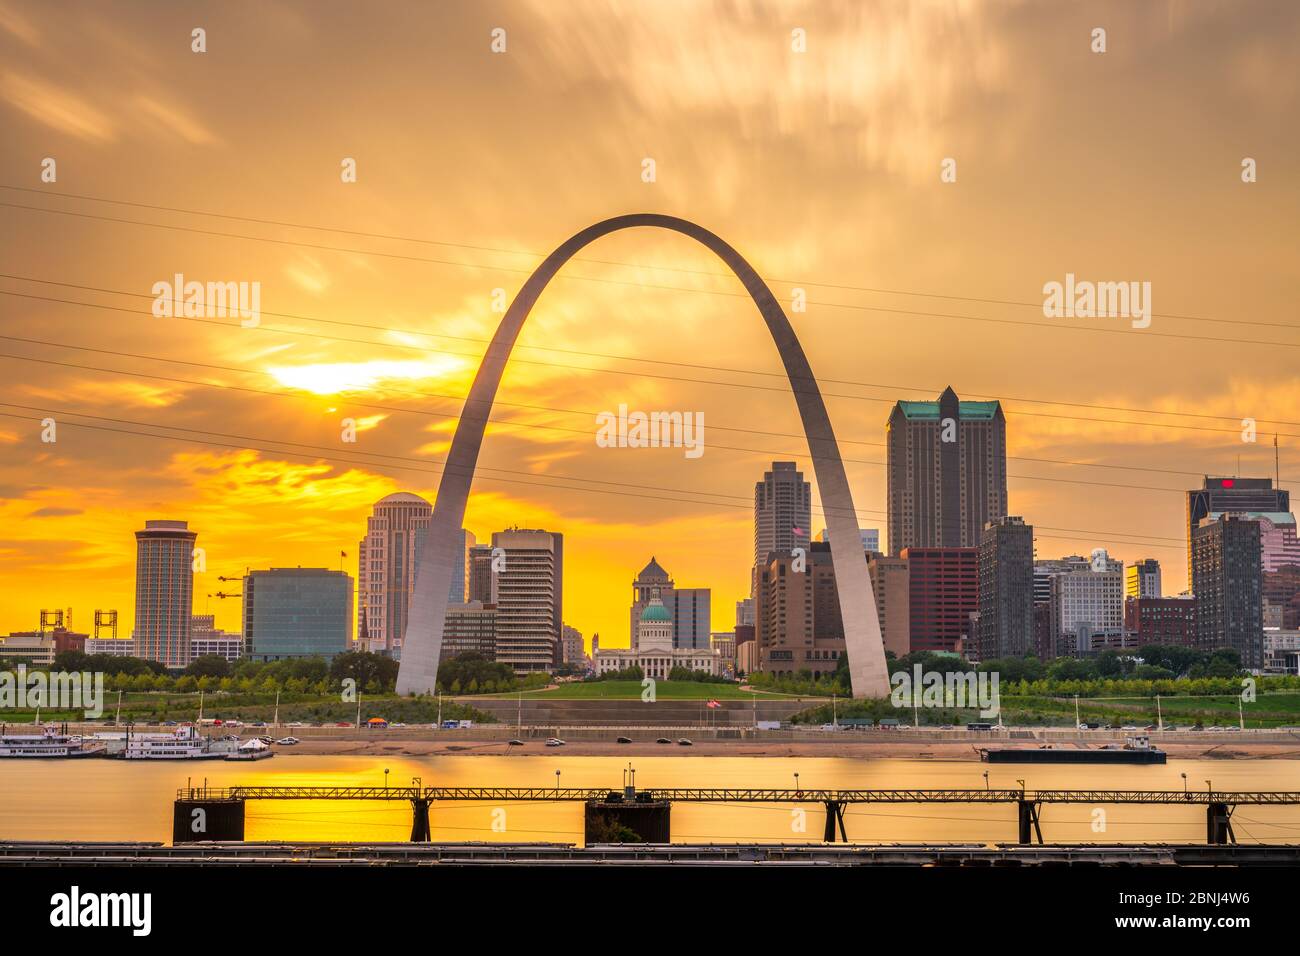 St. Louis, Missouri, USA downtown cityscape on the Mississippi River at sunset. Stock Photo